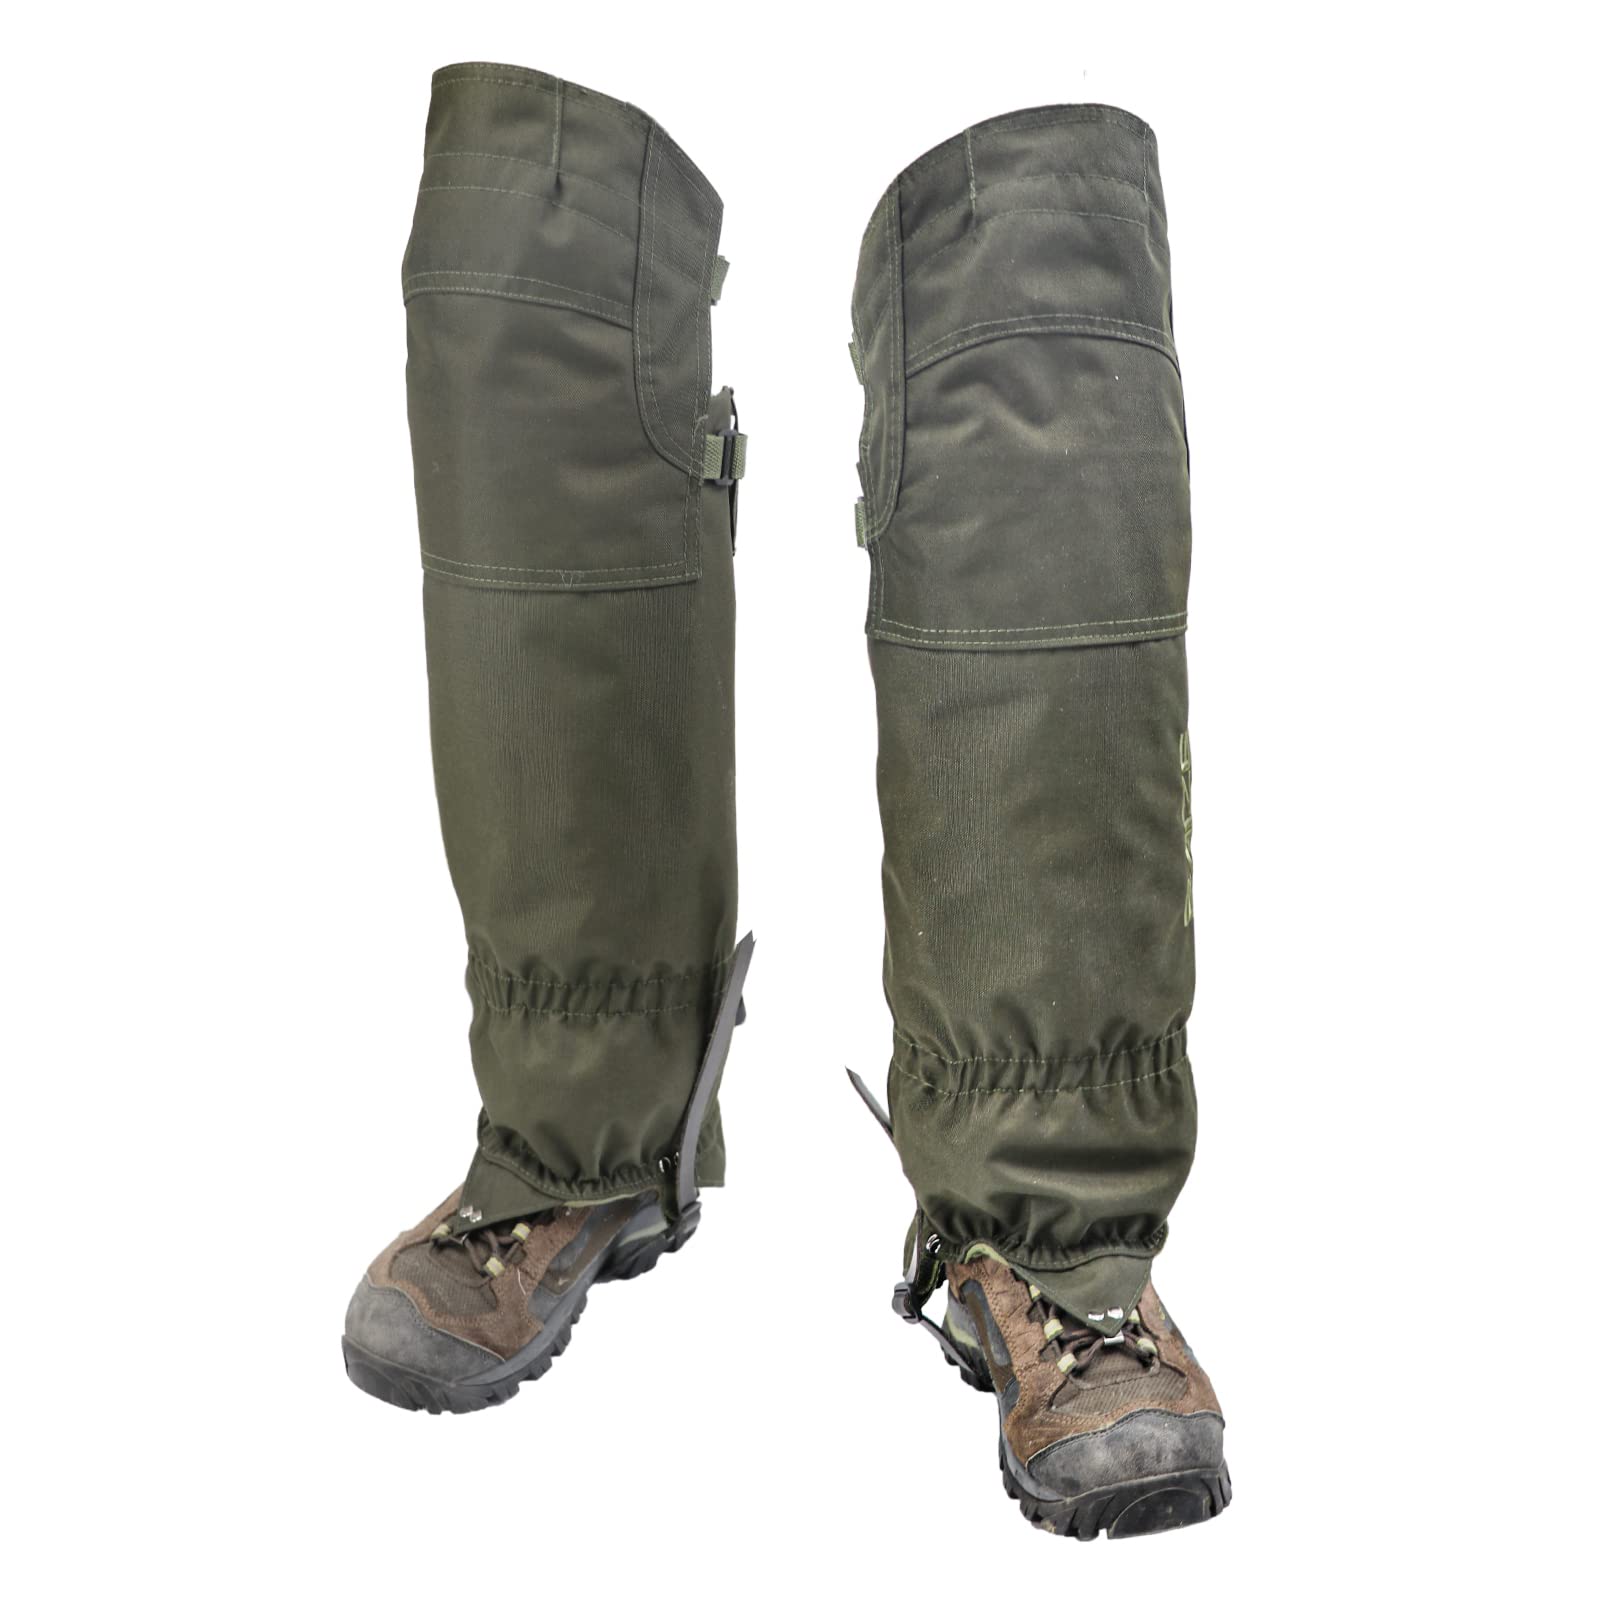 BAIZE Tactical Waterproof Knee High Gaiter Leg Gaiters Hunting Gaiters Knee  Protection Anti-Tear Oxford Fabric Full Length Zip with Velcro Cover  Breathable Windproof for Outdoor Hunting Hiking Walking